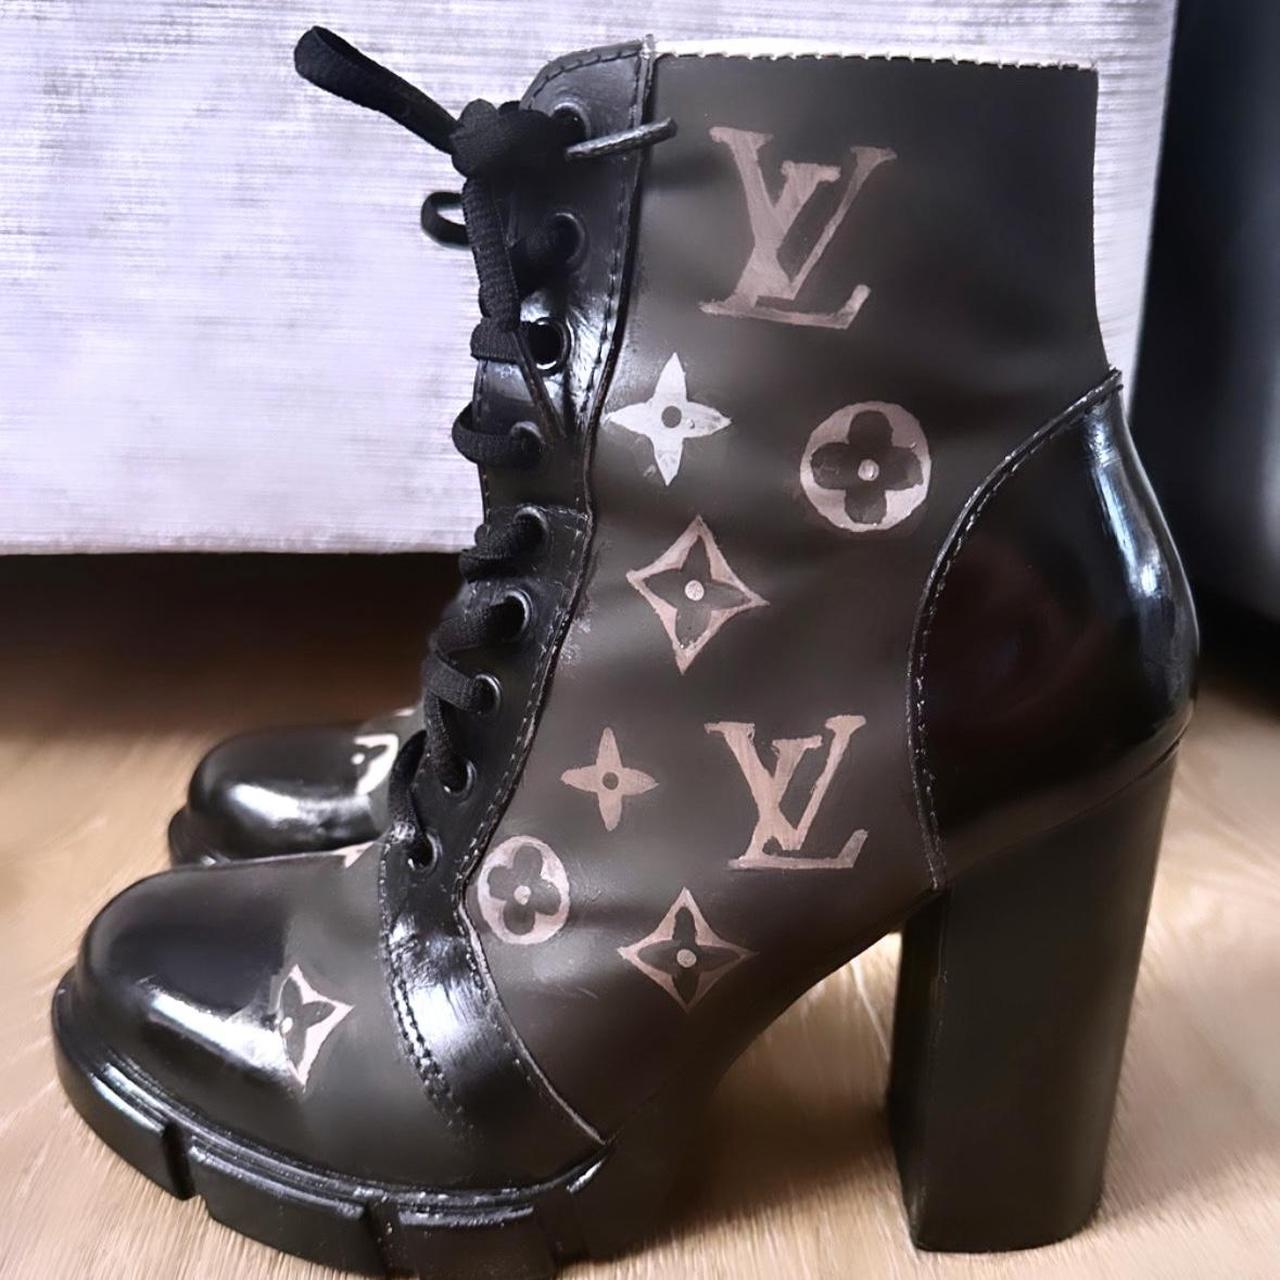 Louis Vuitton Star Trail Ankle Boot Cacao. Size 34.5